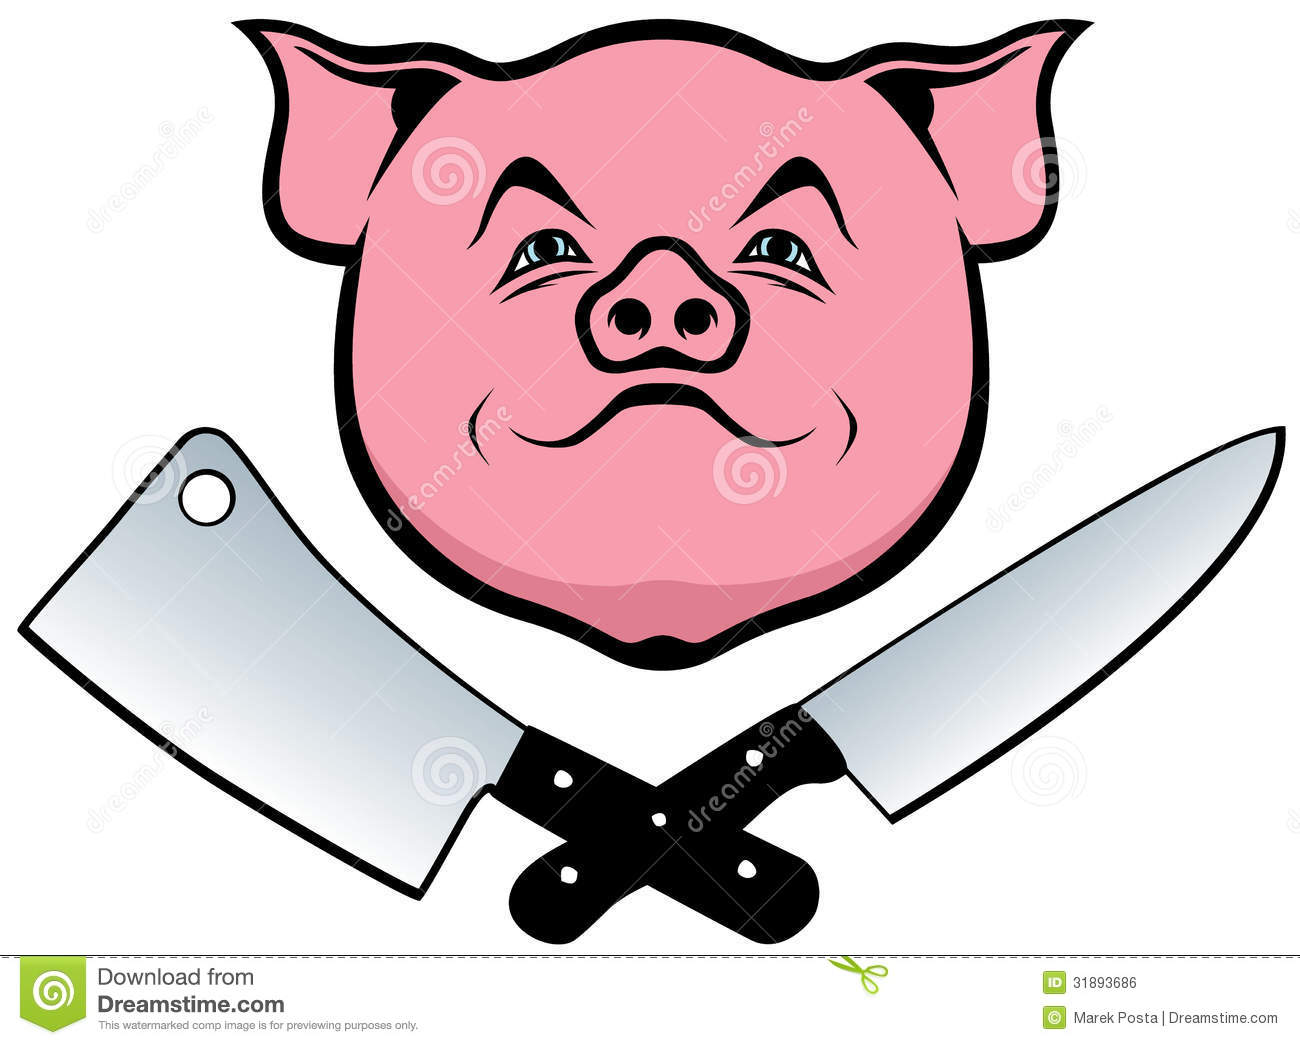 Pig Knife And Cleaver Royalty Free Stock Image   Image  31893686